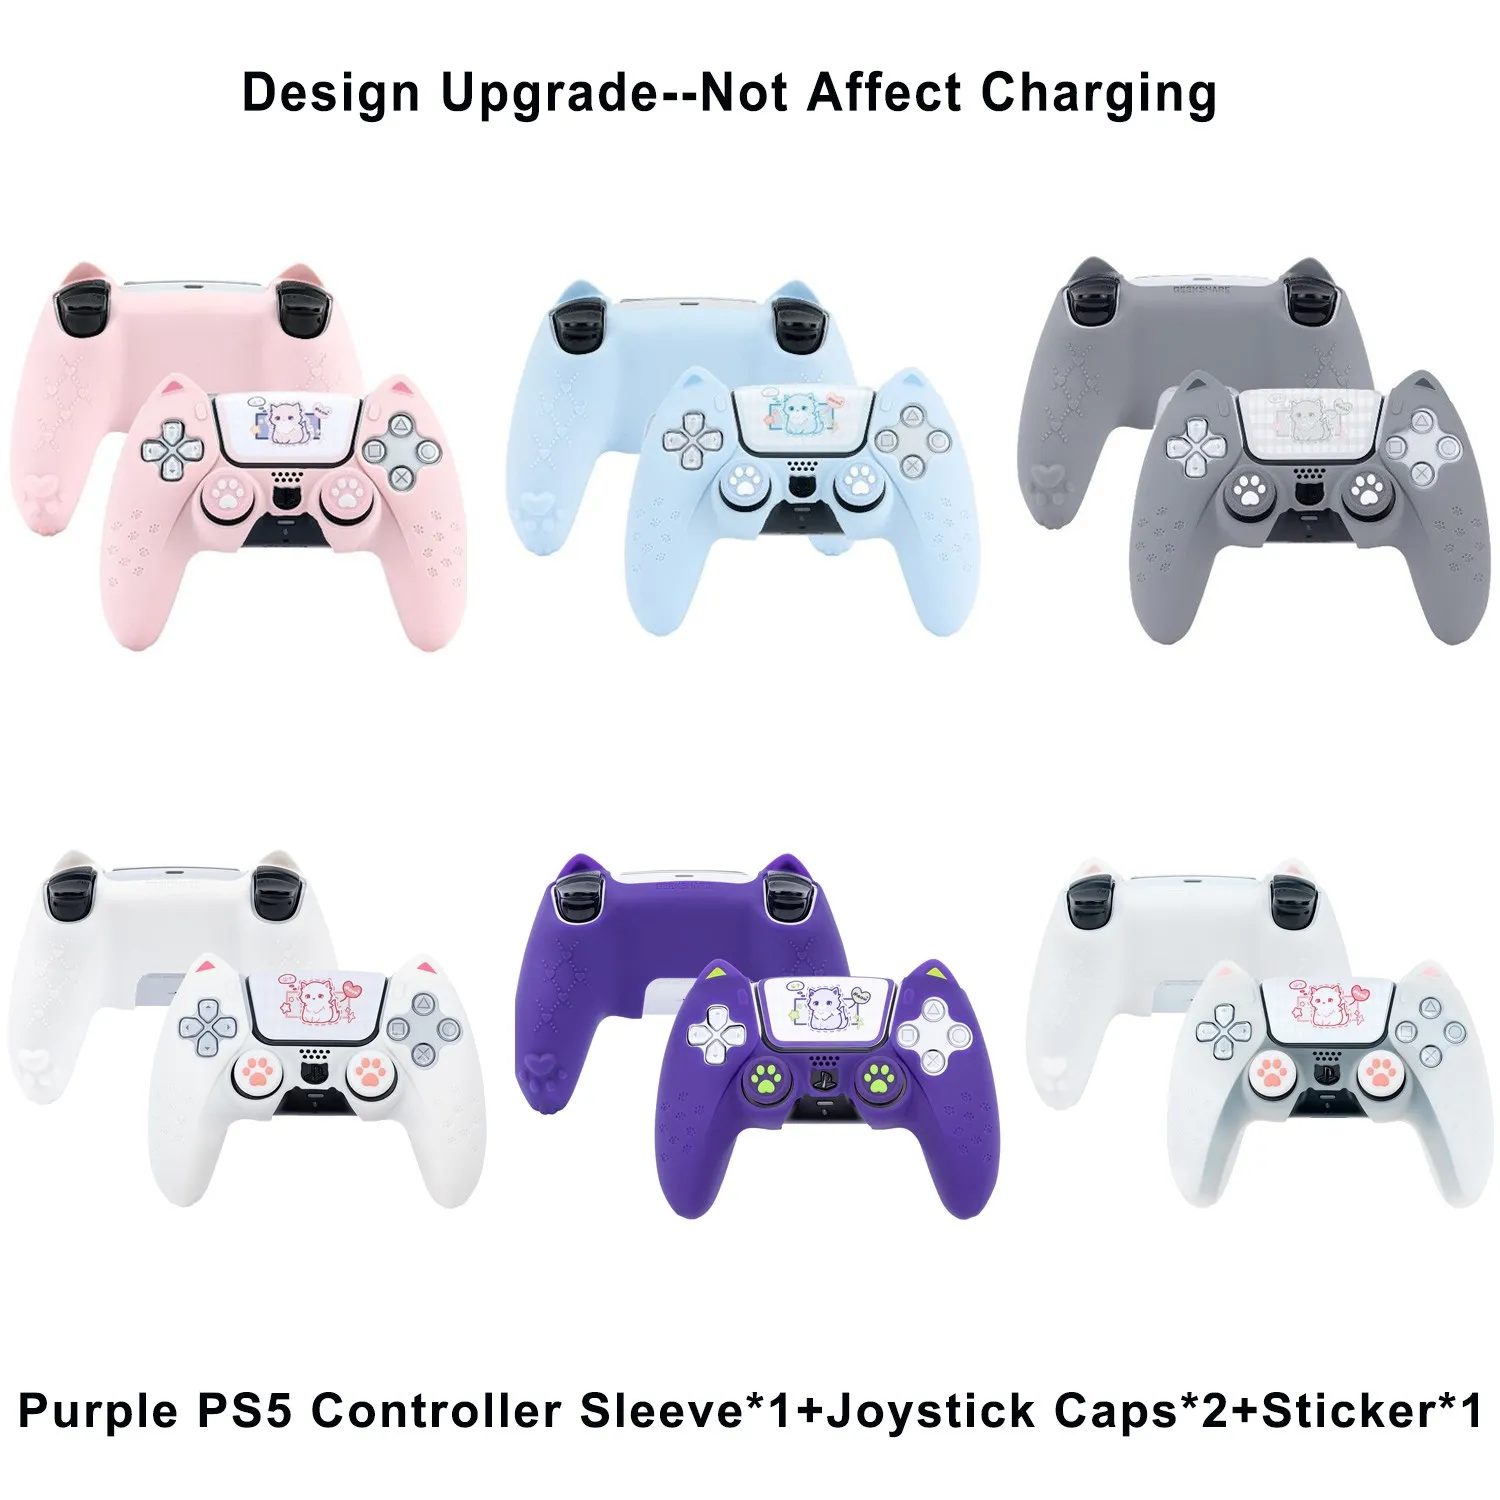 

GeekShare Protective Sleeve for PS5 Controller Cat Paw Anti-Slip Silicone Case Cover with Joystick Caps,Fit the Charging Base